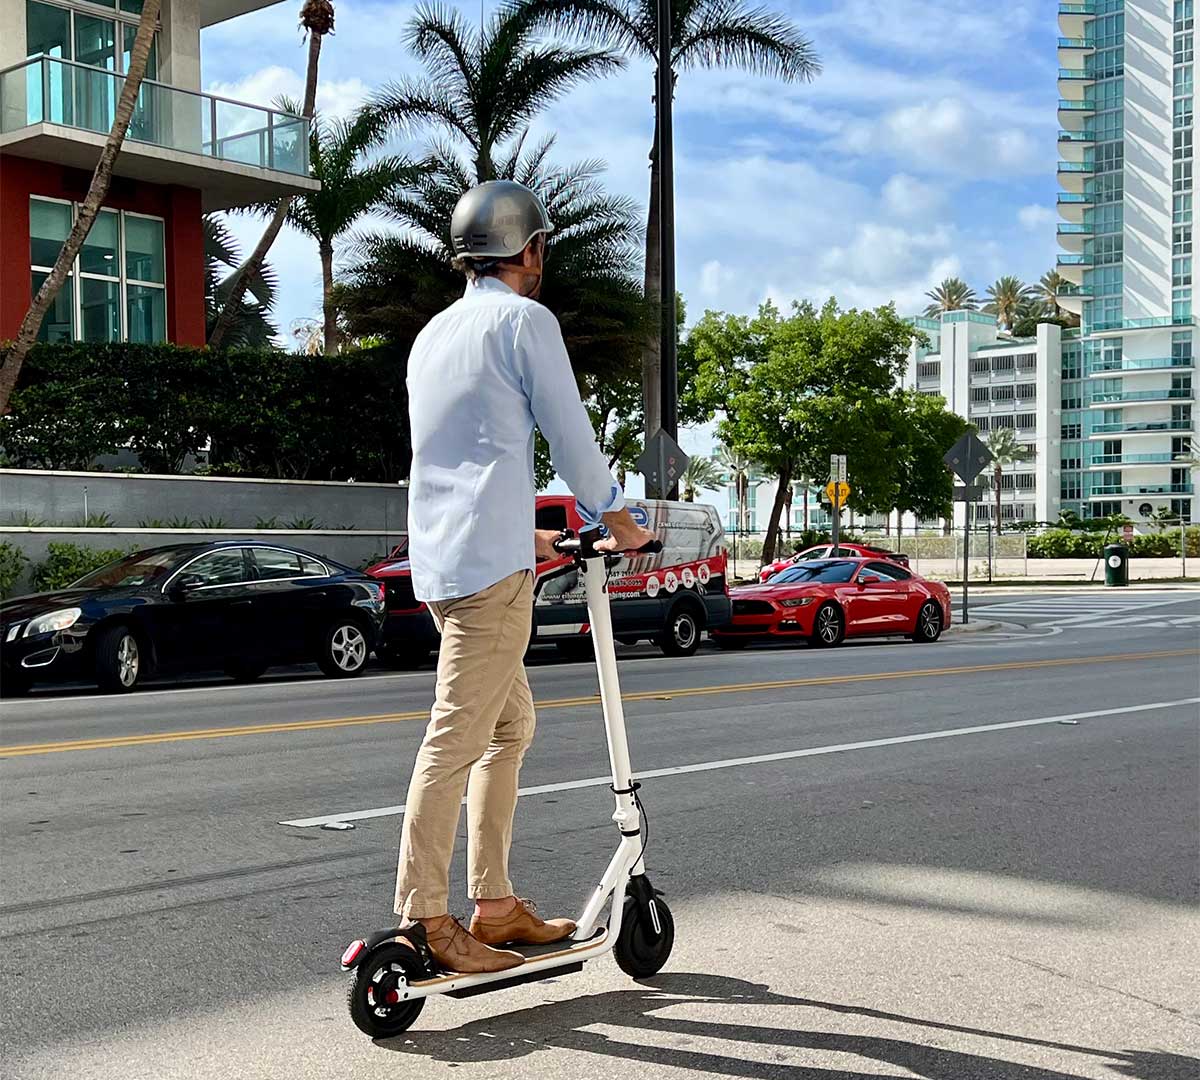 An individual in business casual attire and wearing a helmet responsibly rides an electric scooter alongside a city street, highlighting the importance of road safety and the shared use of streets between electric scooters and traditional vehicles.